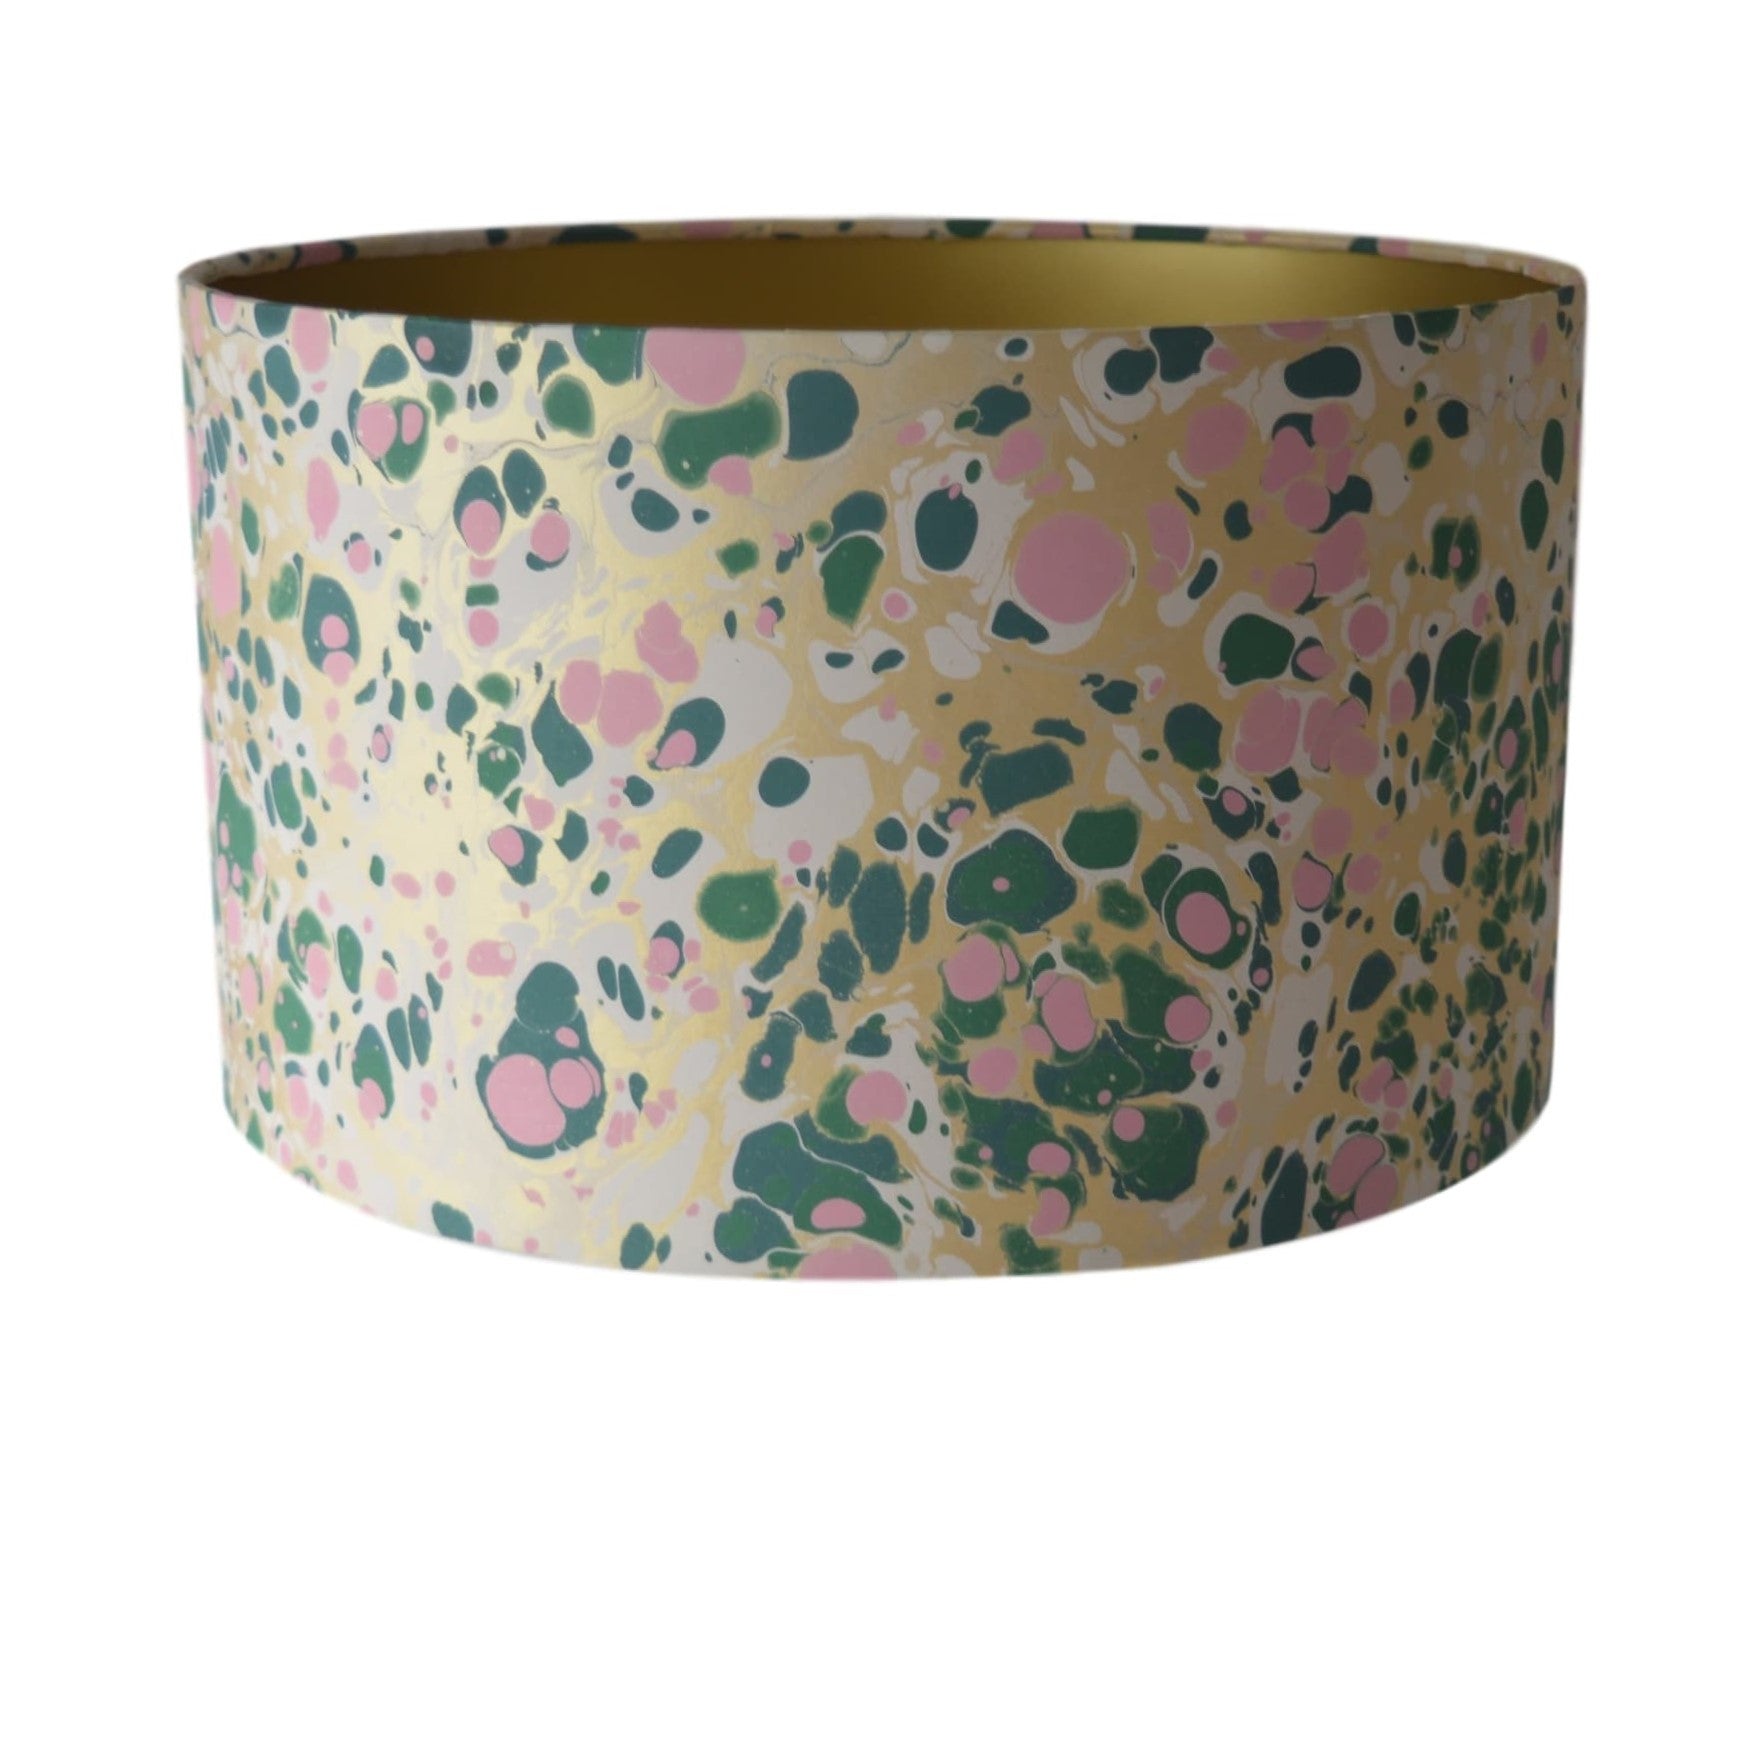 Munro and Kerr green pink and metallic gold marbled paper for a drum lampshade